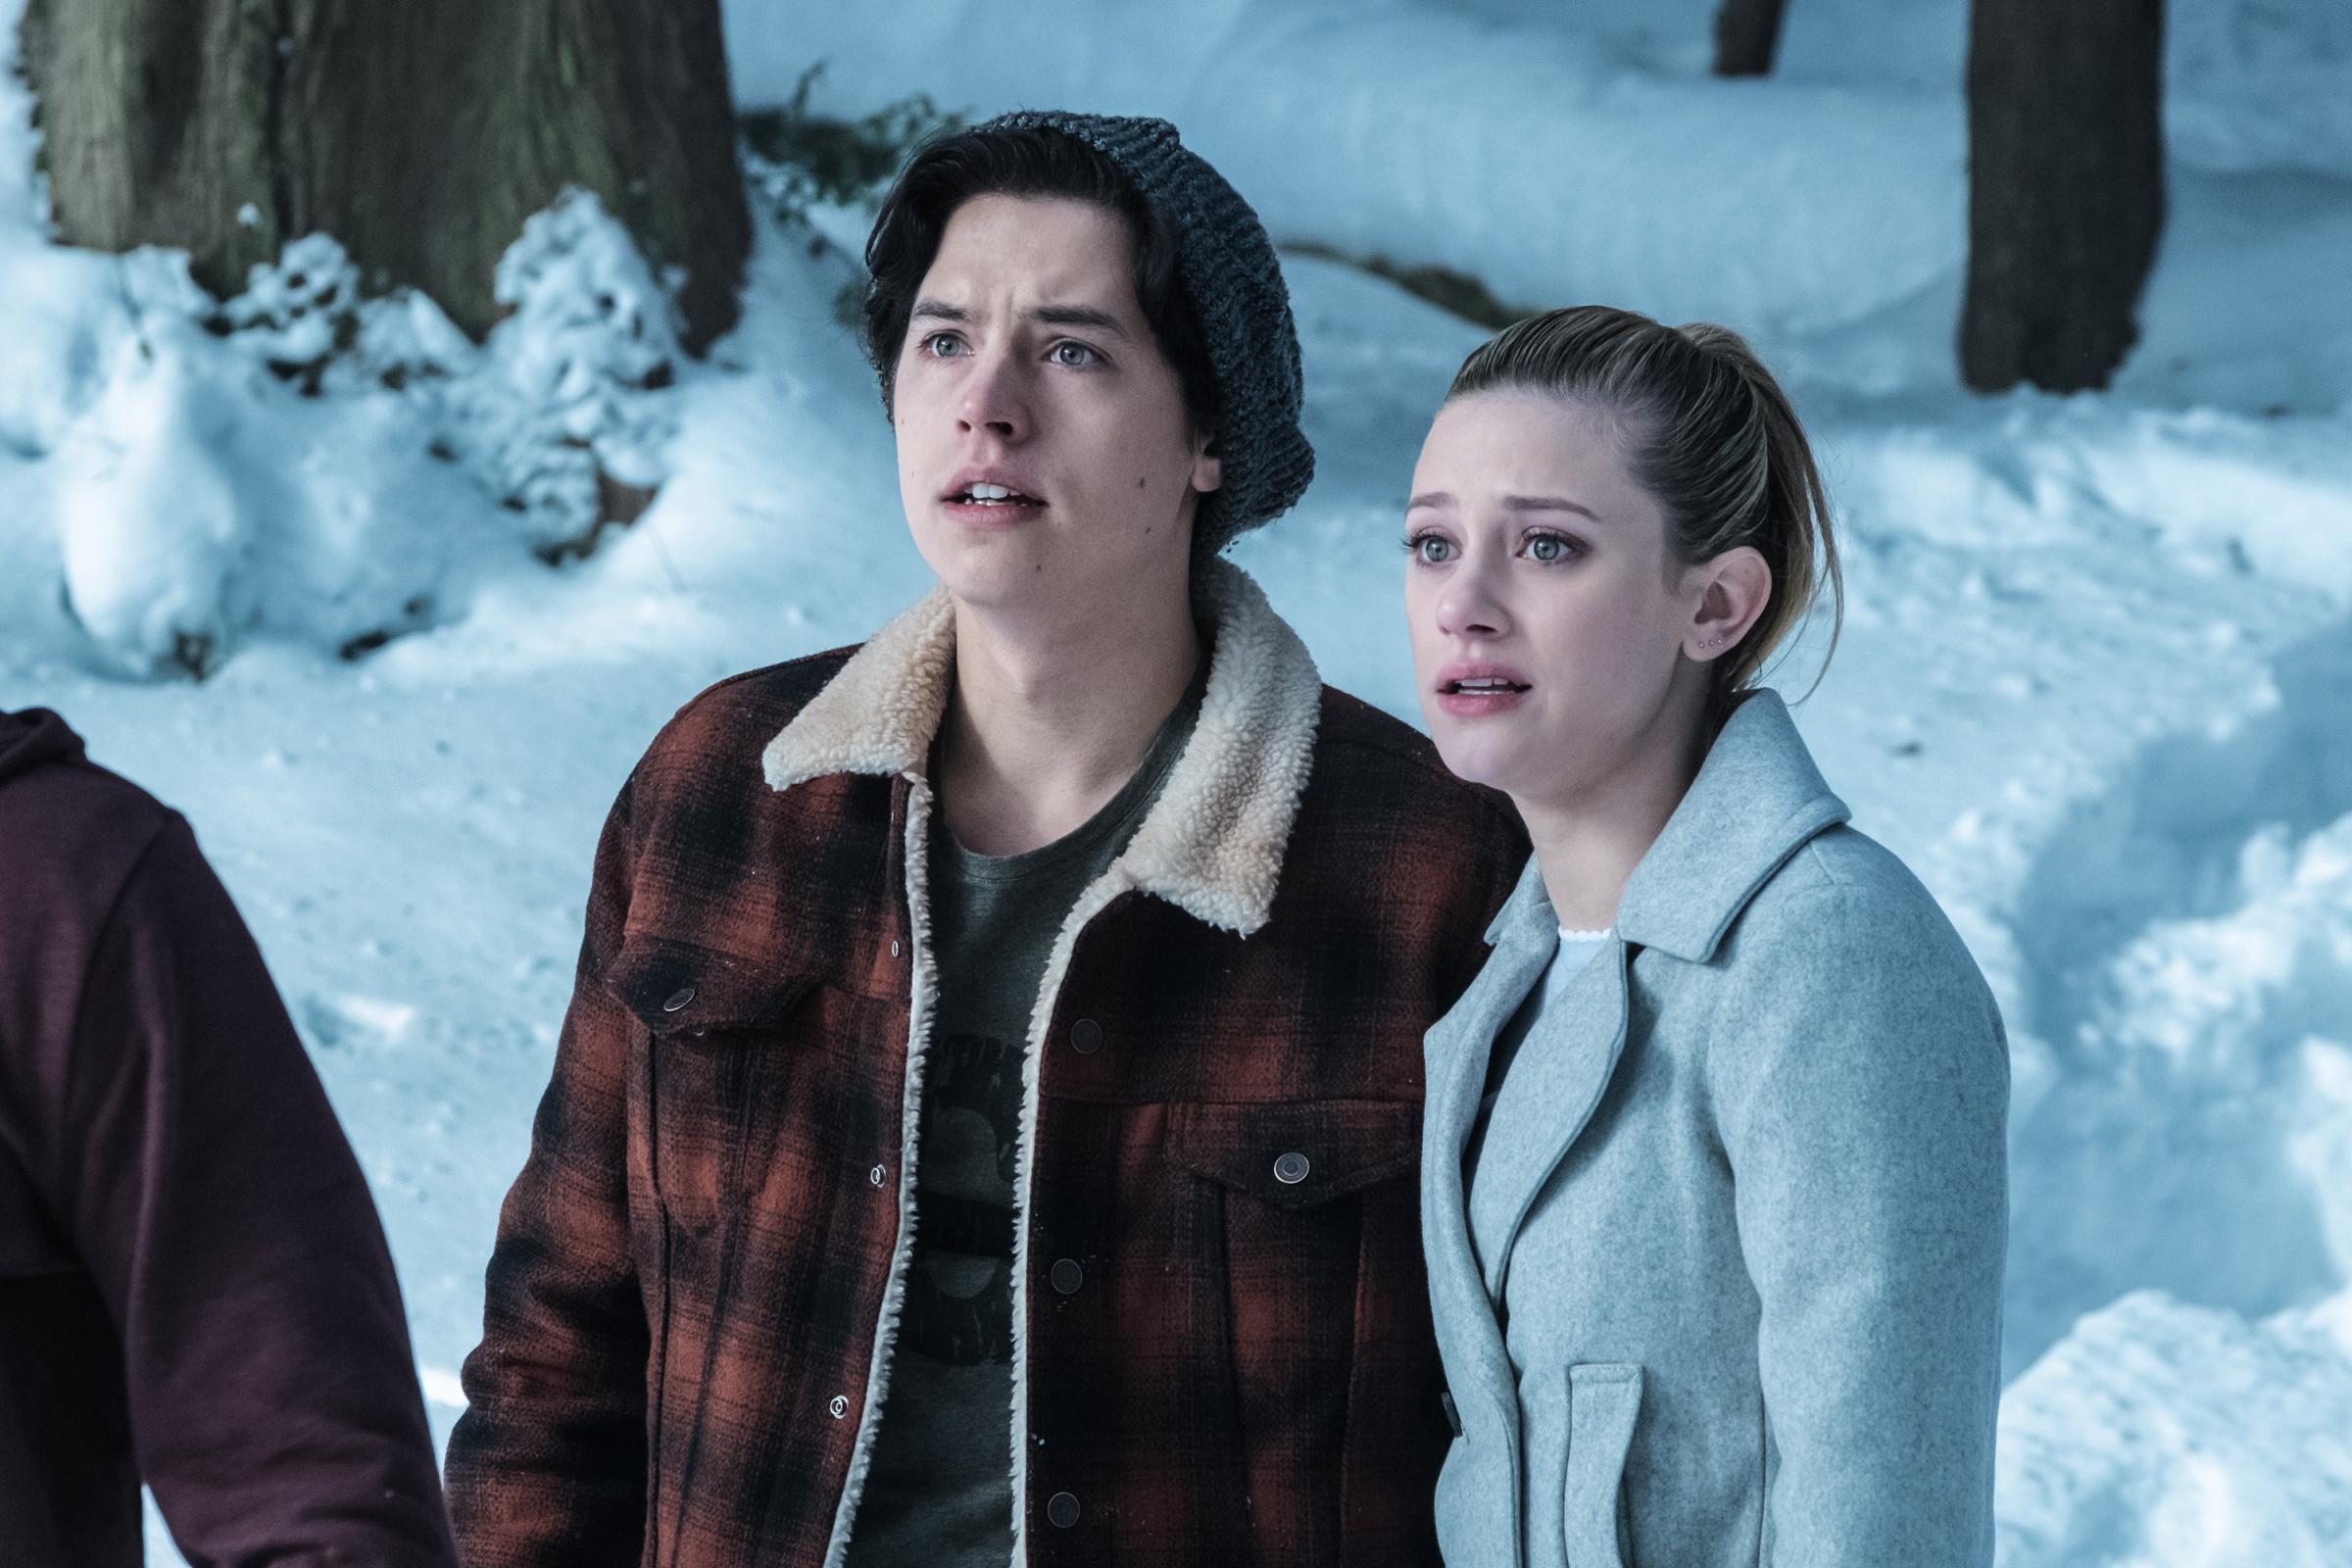 Riverdale -- "Chapter Thirteen: The Sweet Hereafter" -- Image Number: RVD113a_0038.jpg -- Pictured (L-R): Cole Sprouse as Jughead Jones and Lili Reinhart as Betty Cooper -- Photo: Katie Yu/The CW -- ÃÂ© 2017 The CW Network. All Rights Reserved